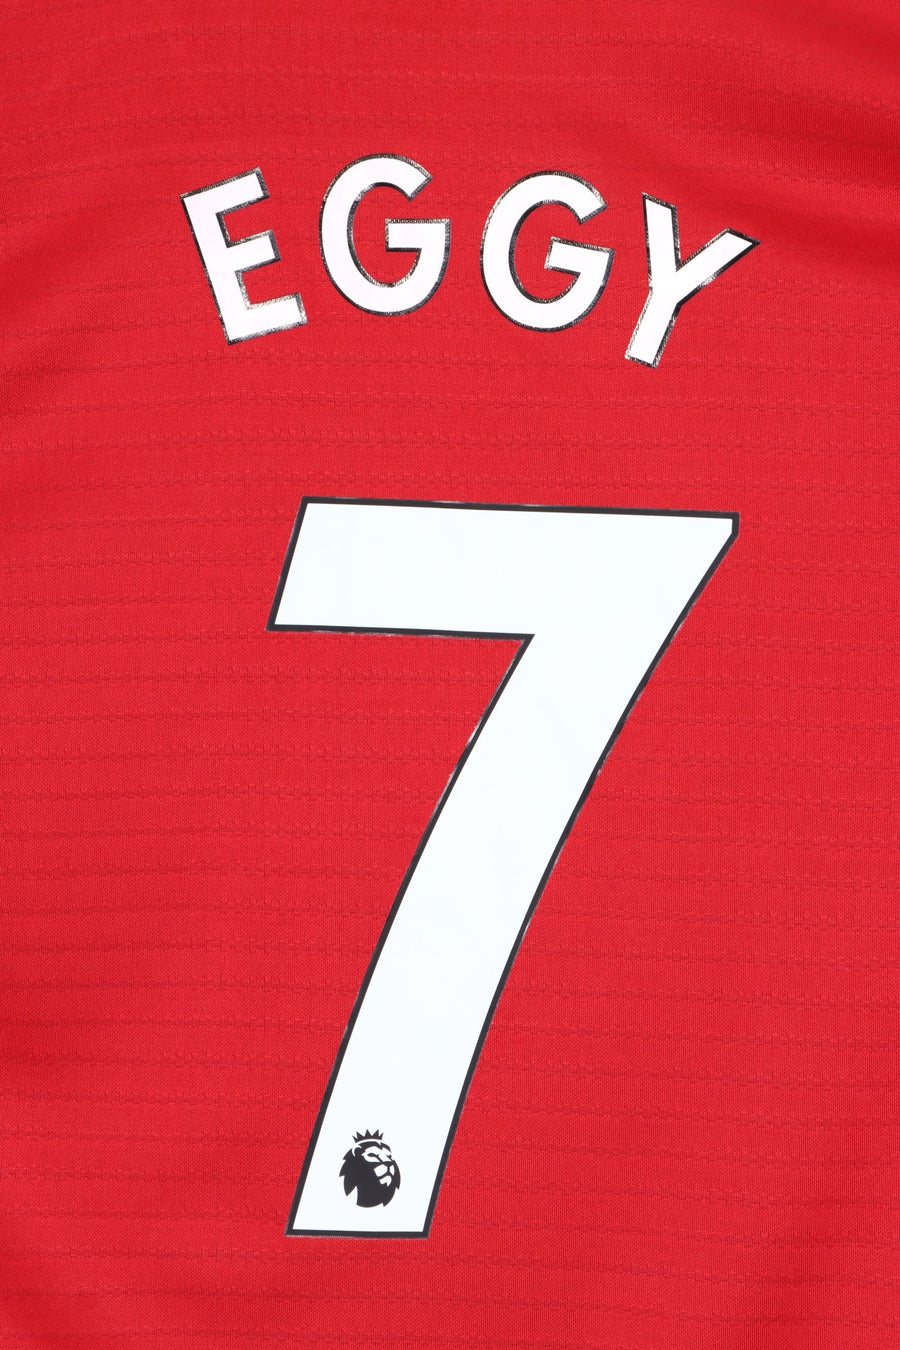 REPLICA Manchester United #7 'Eggy' 2018/2019 ADIDAS Home Soccer Jersey (M)